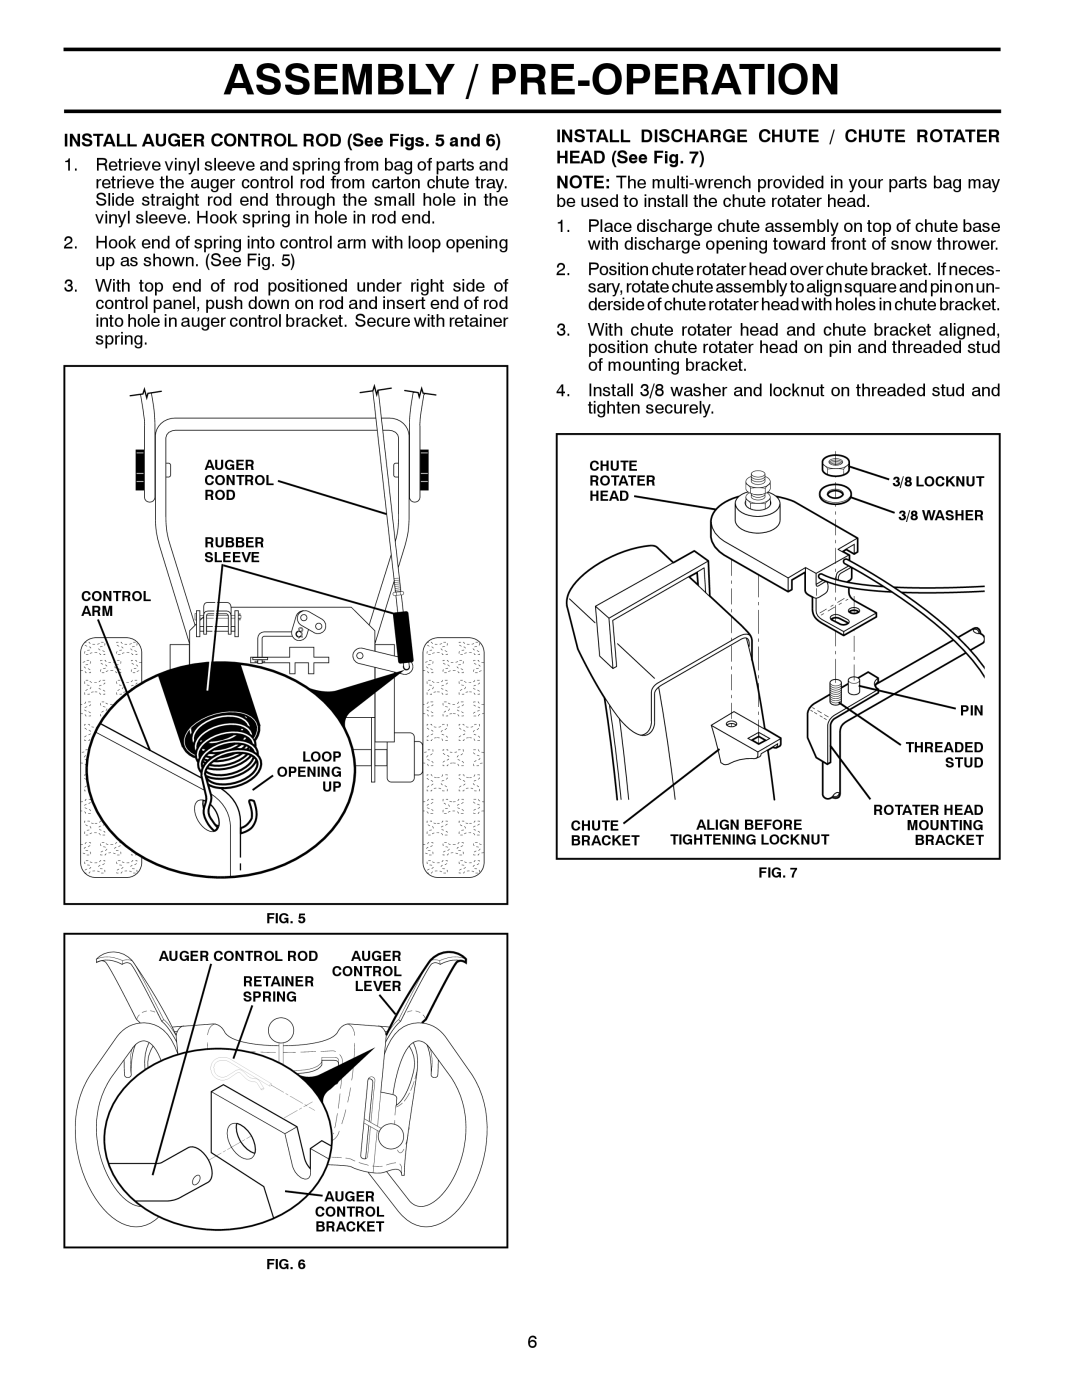 Poulan 435548, 96198002901 owner manual Assembly / Pre-Operation, INSTALL AUGER CONTROL ROD See Figs. 5 and 